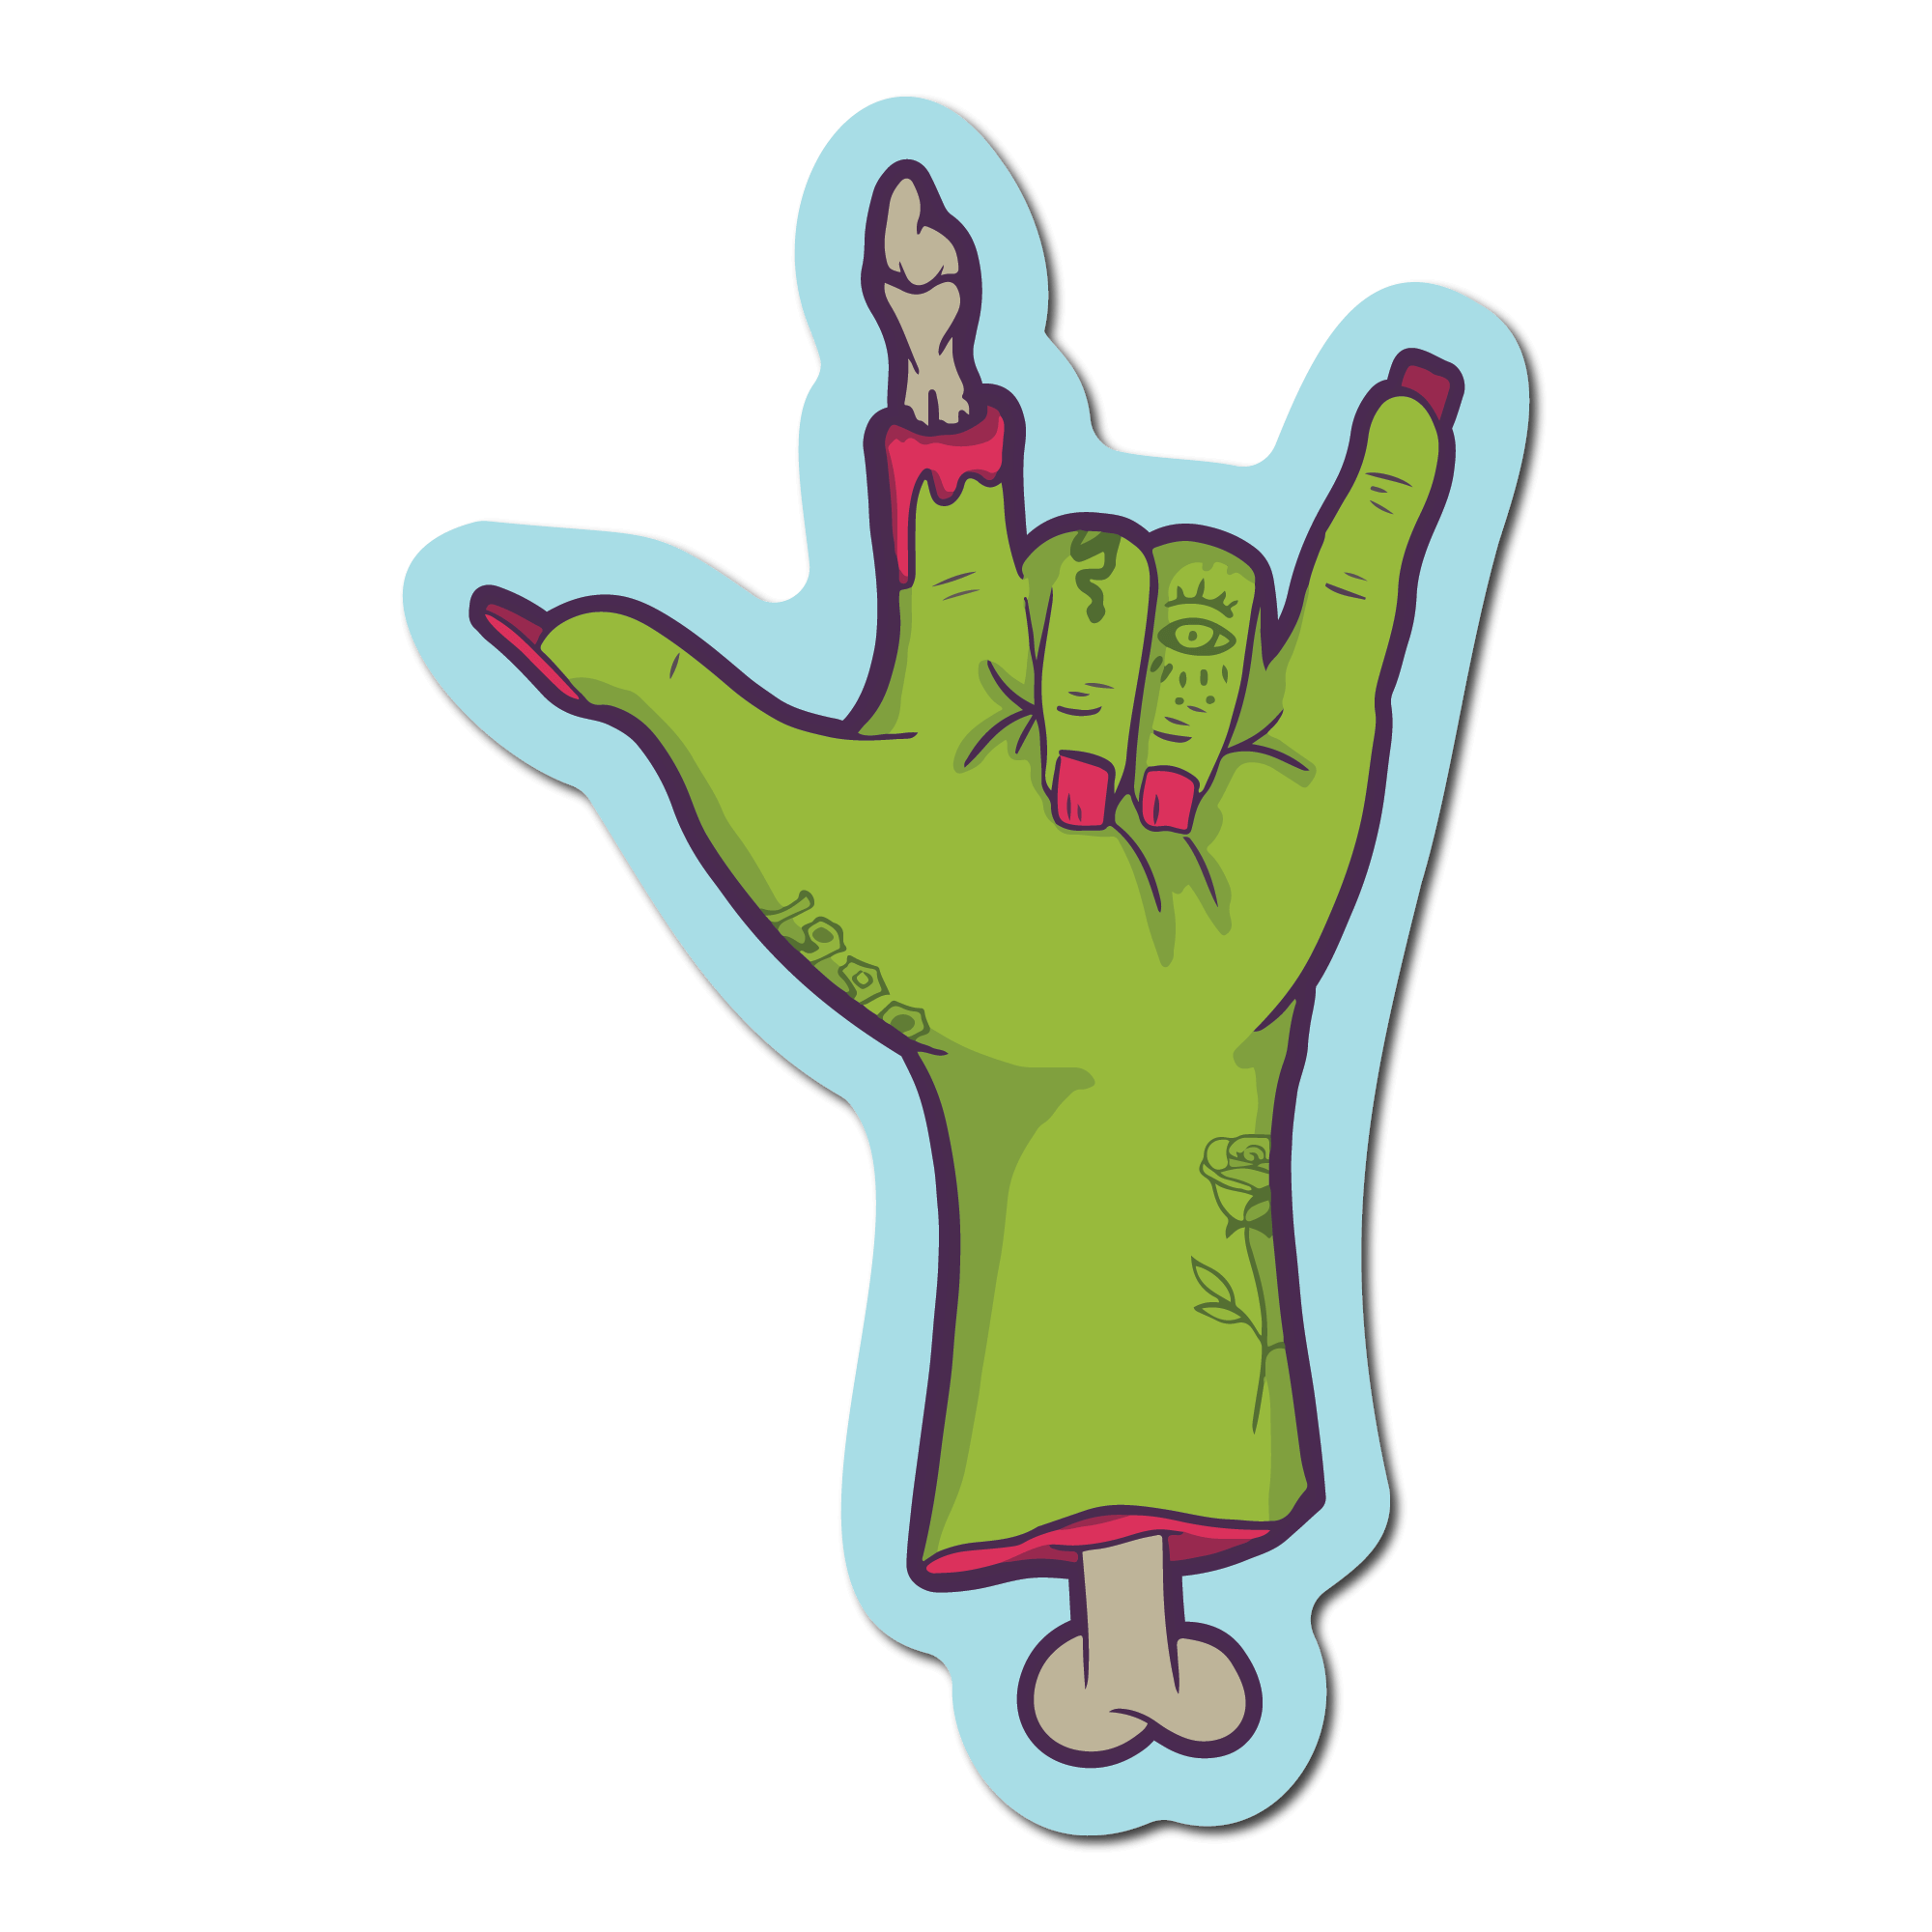 Small Sticker of a green zombie hand that says ily in sign language